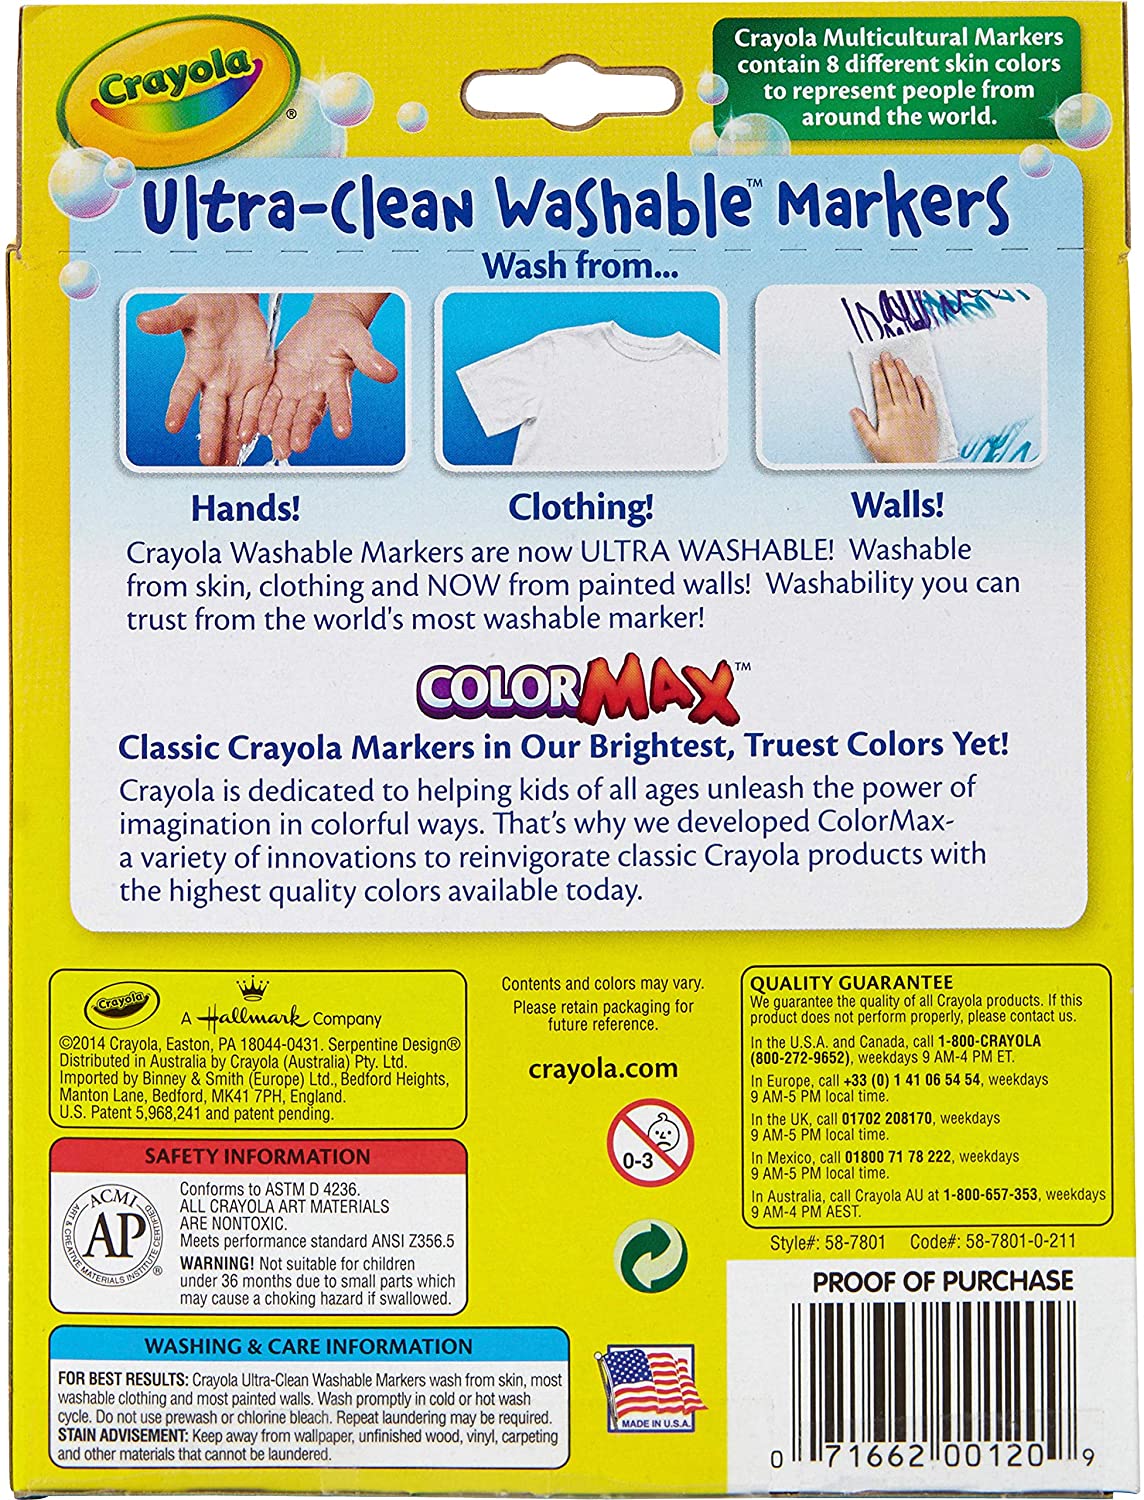 Crayola Ultra Clean Washable Multicultural Markers Broad Line 10 Count